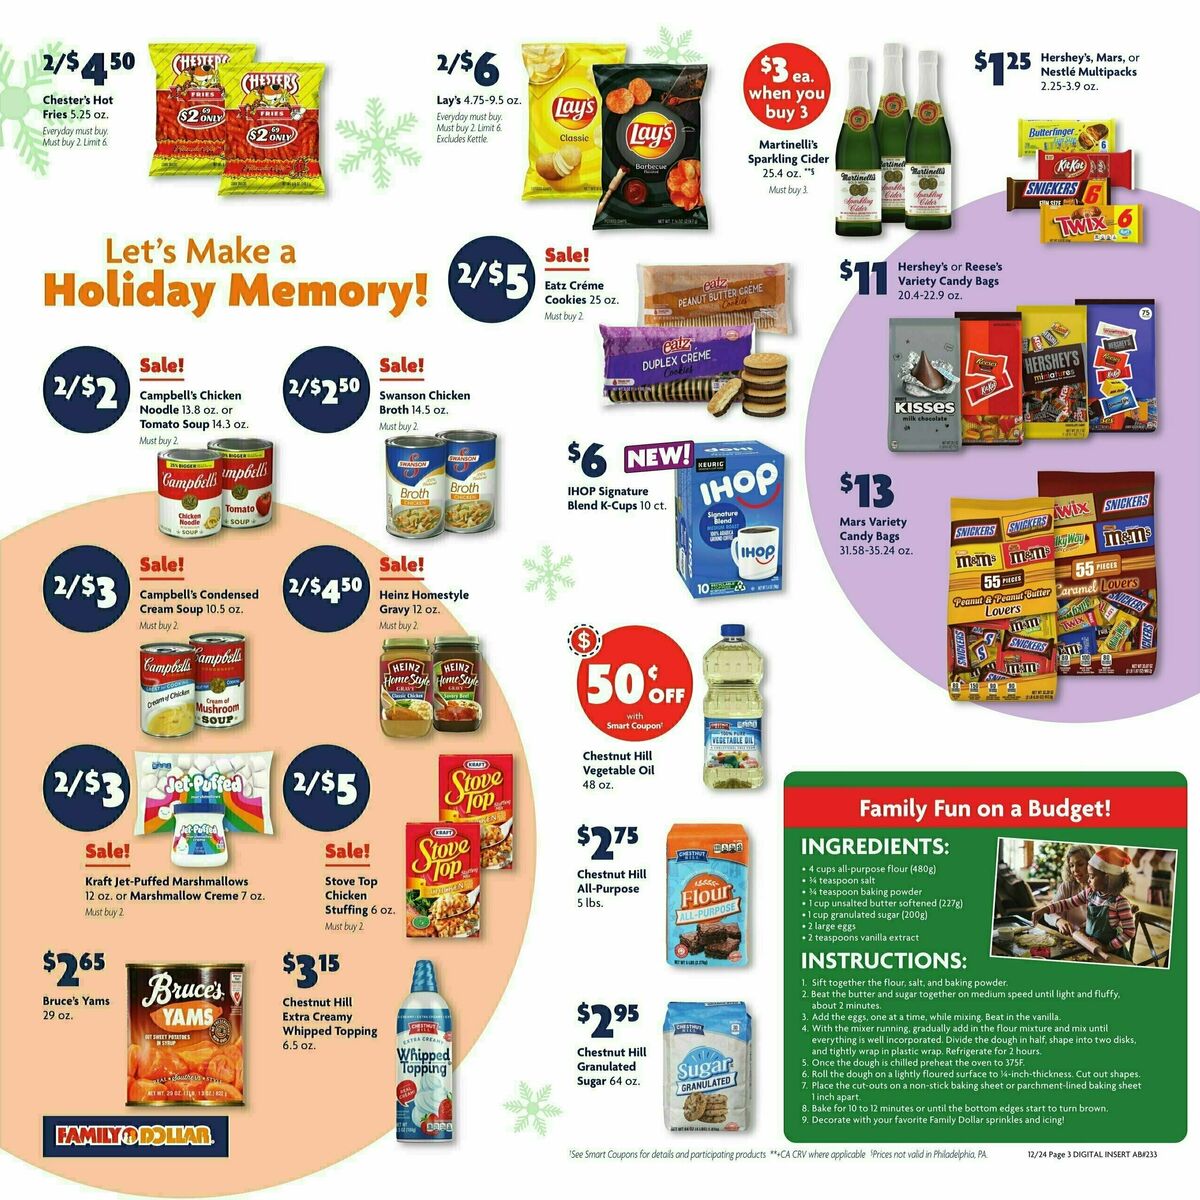 Family Dollar Weekly Ad from December 24